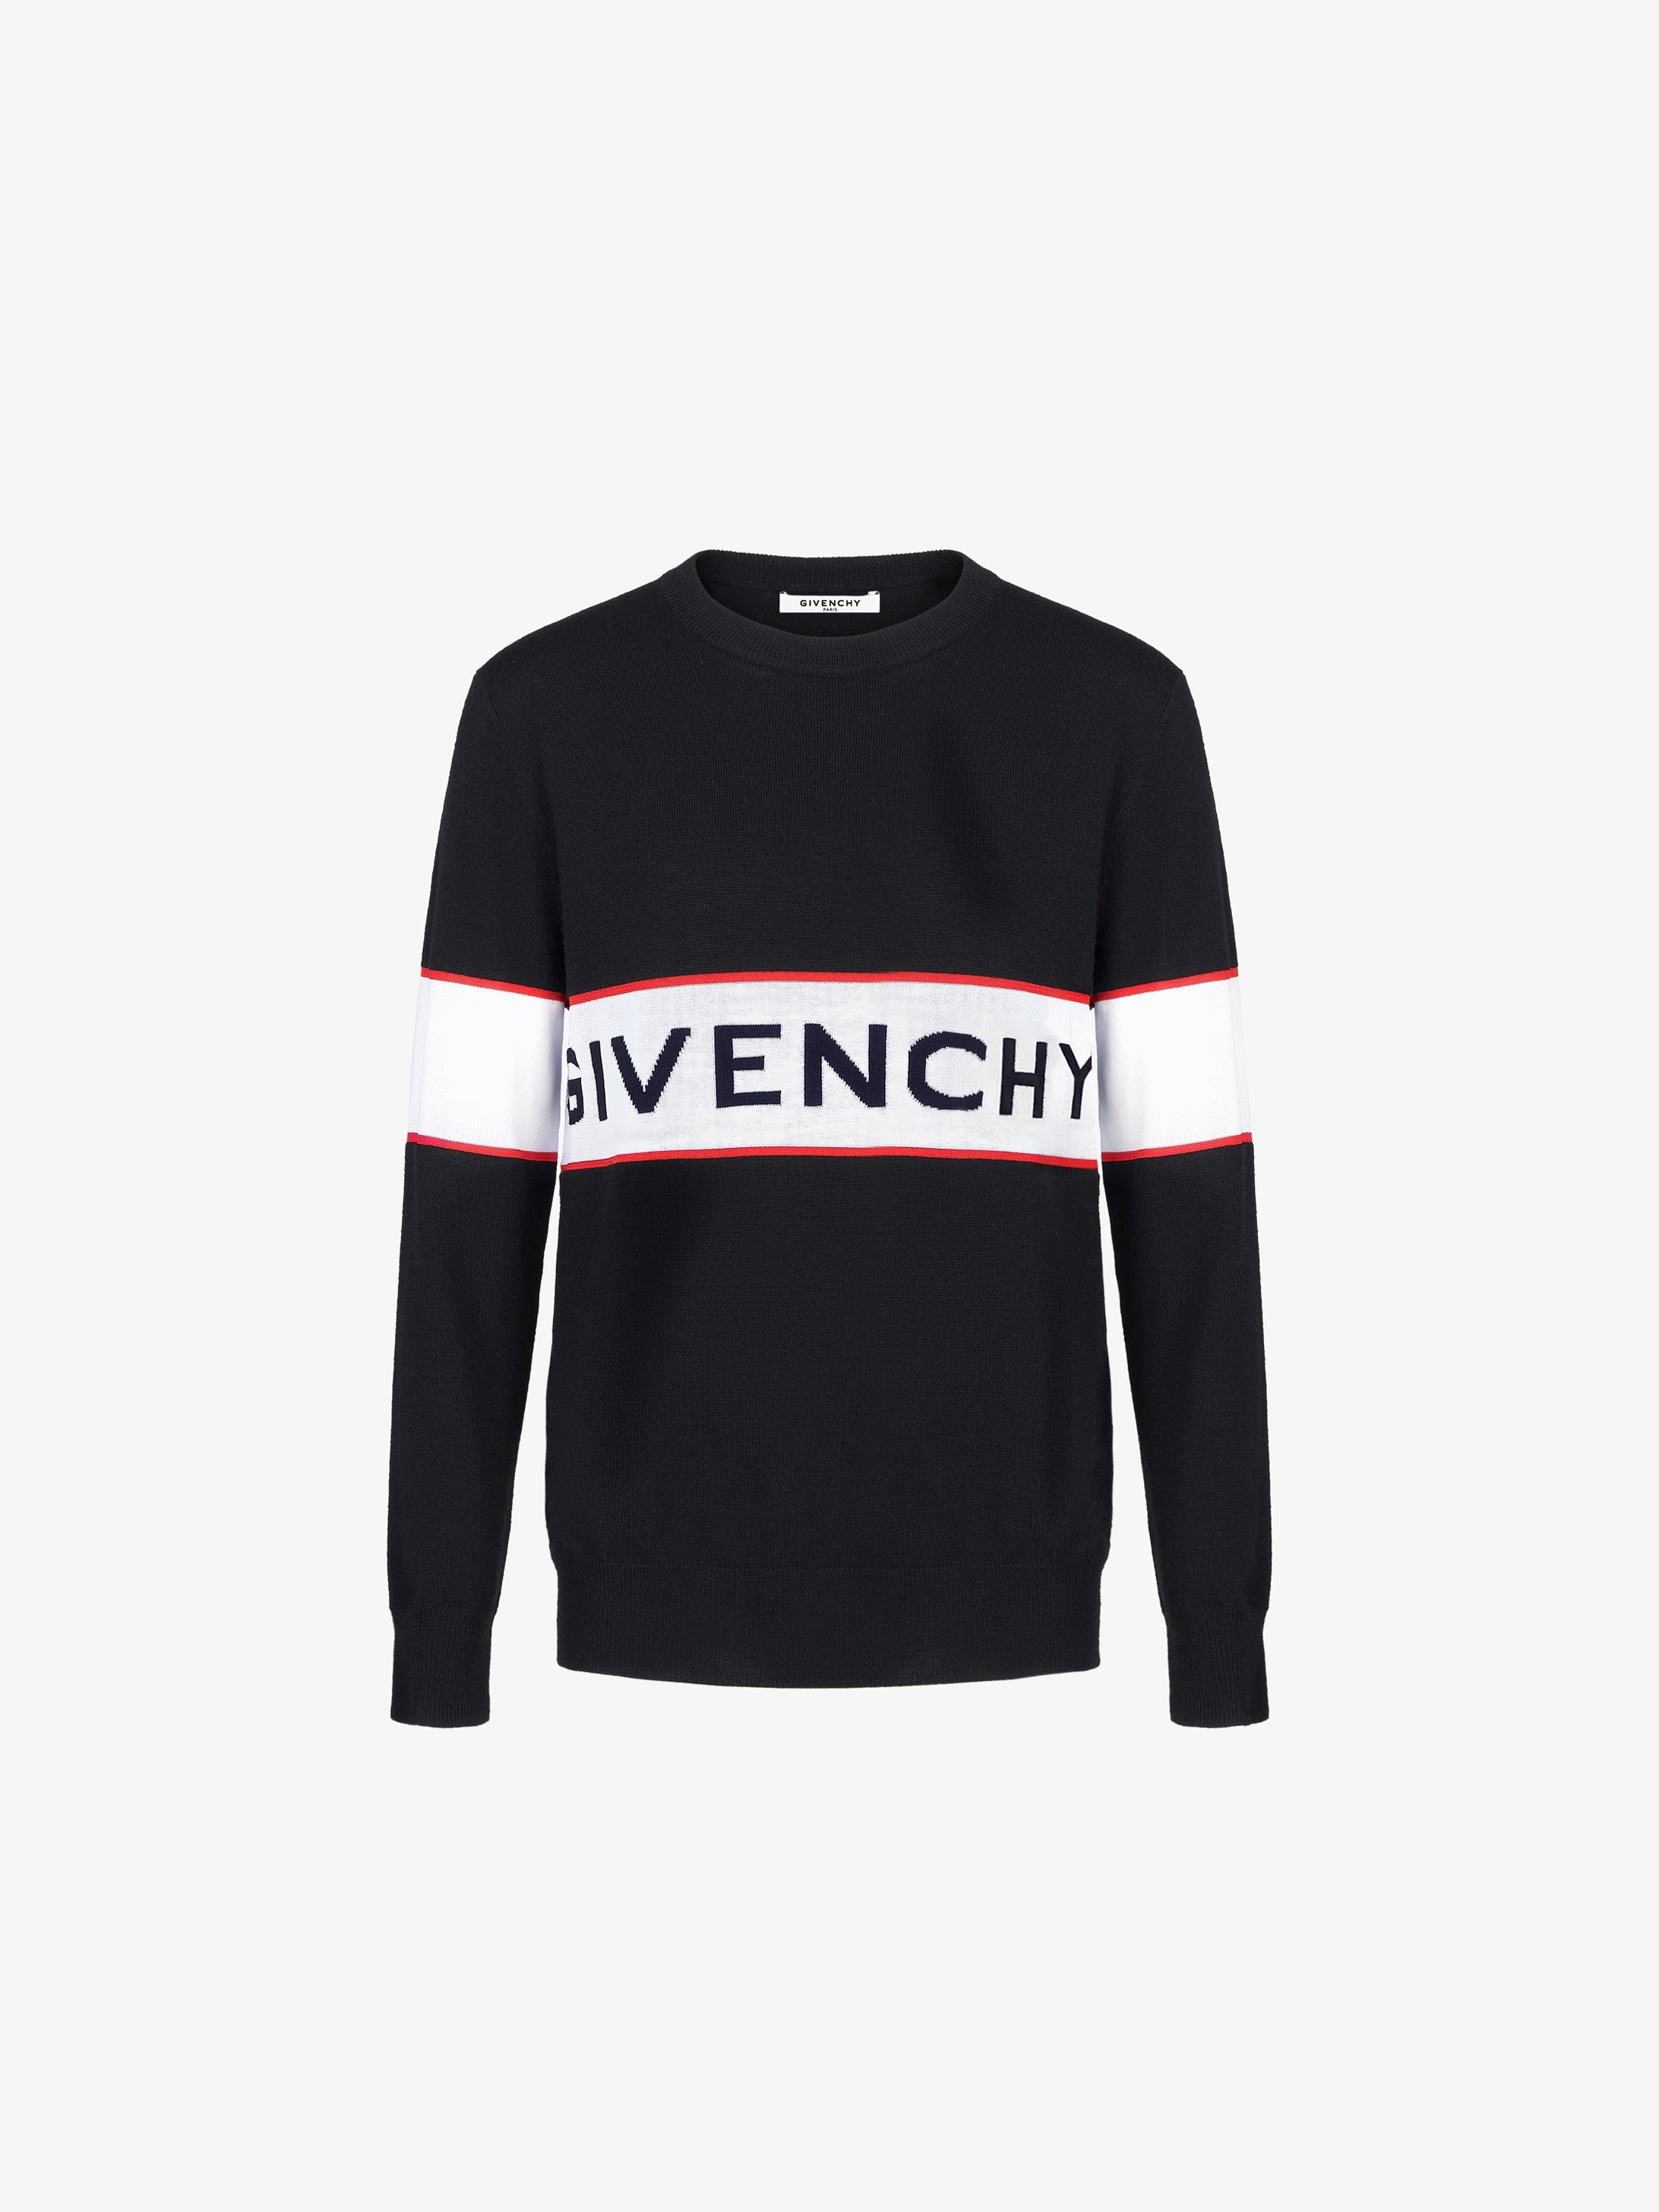 GIVENCHY sweater in wool | GIVENCHY Paris